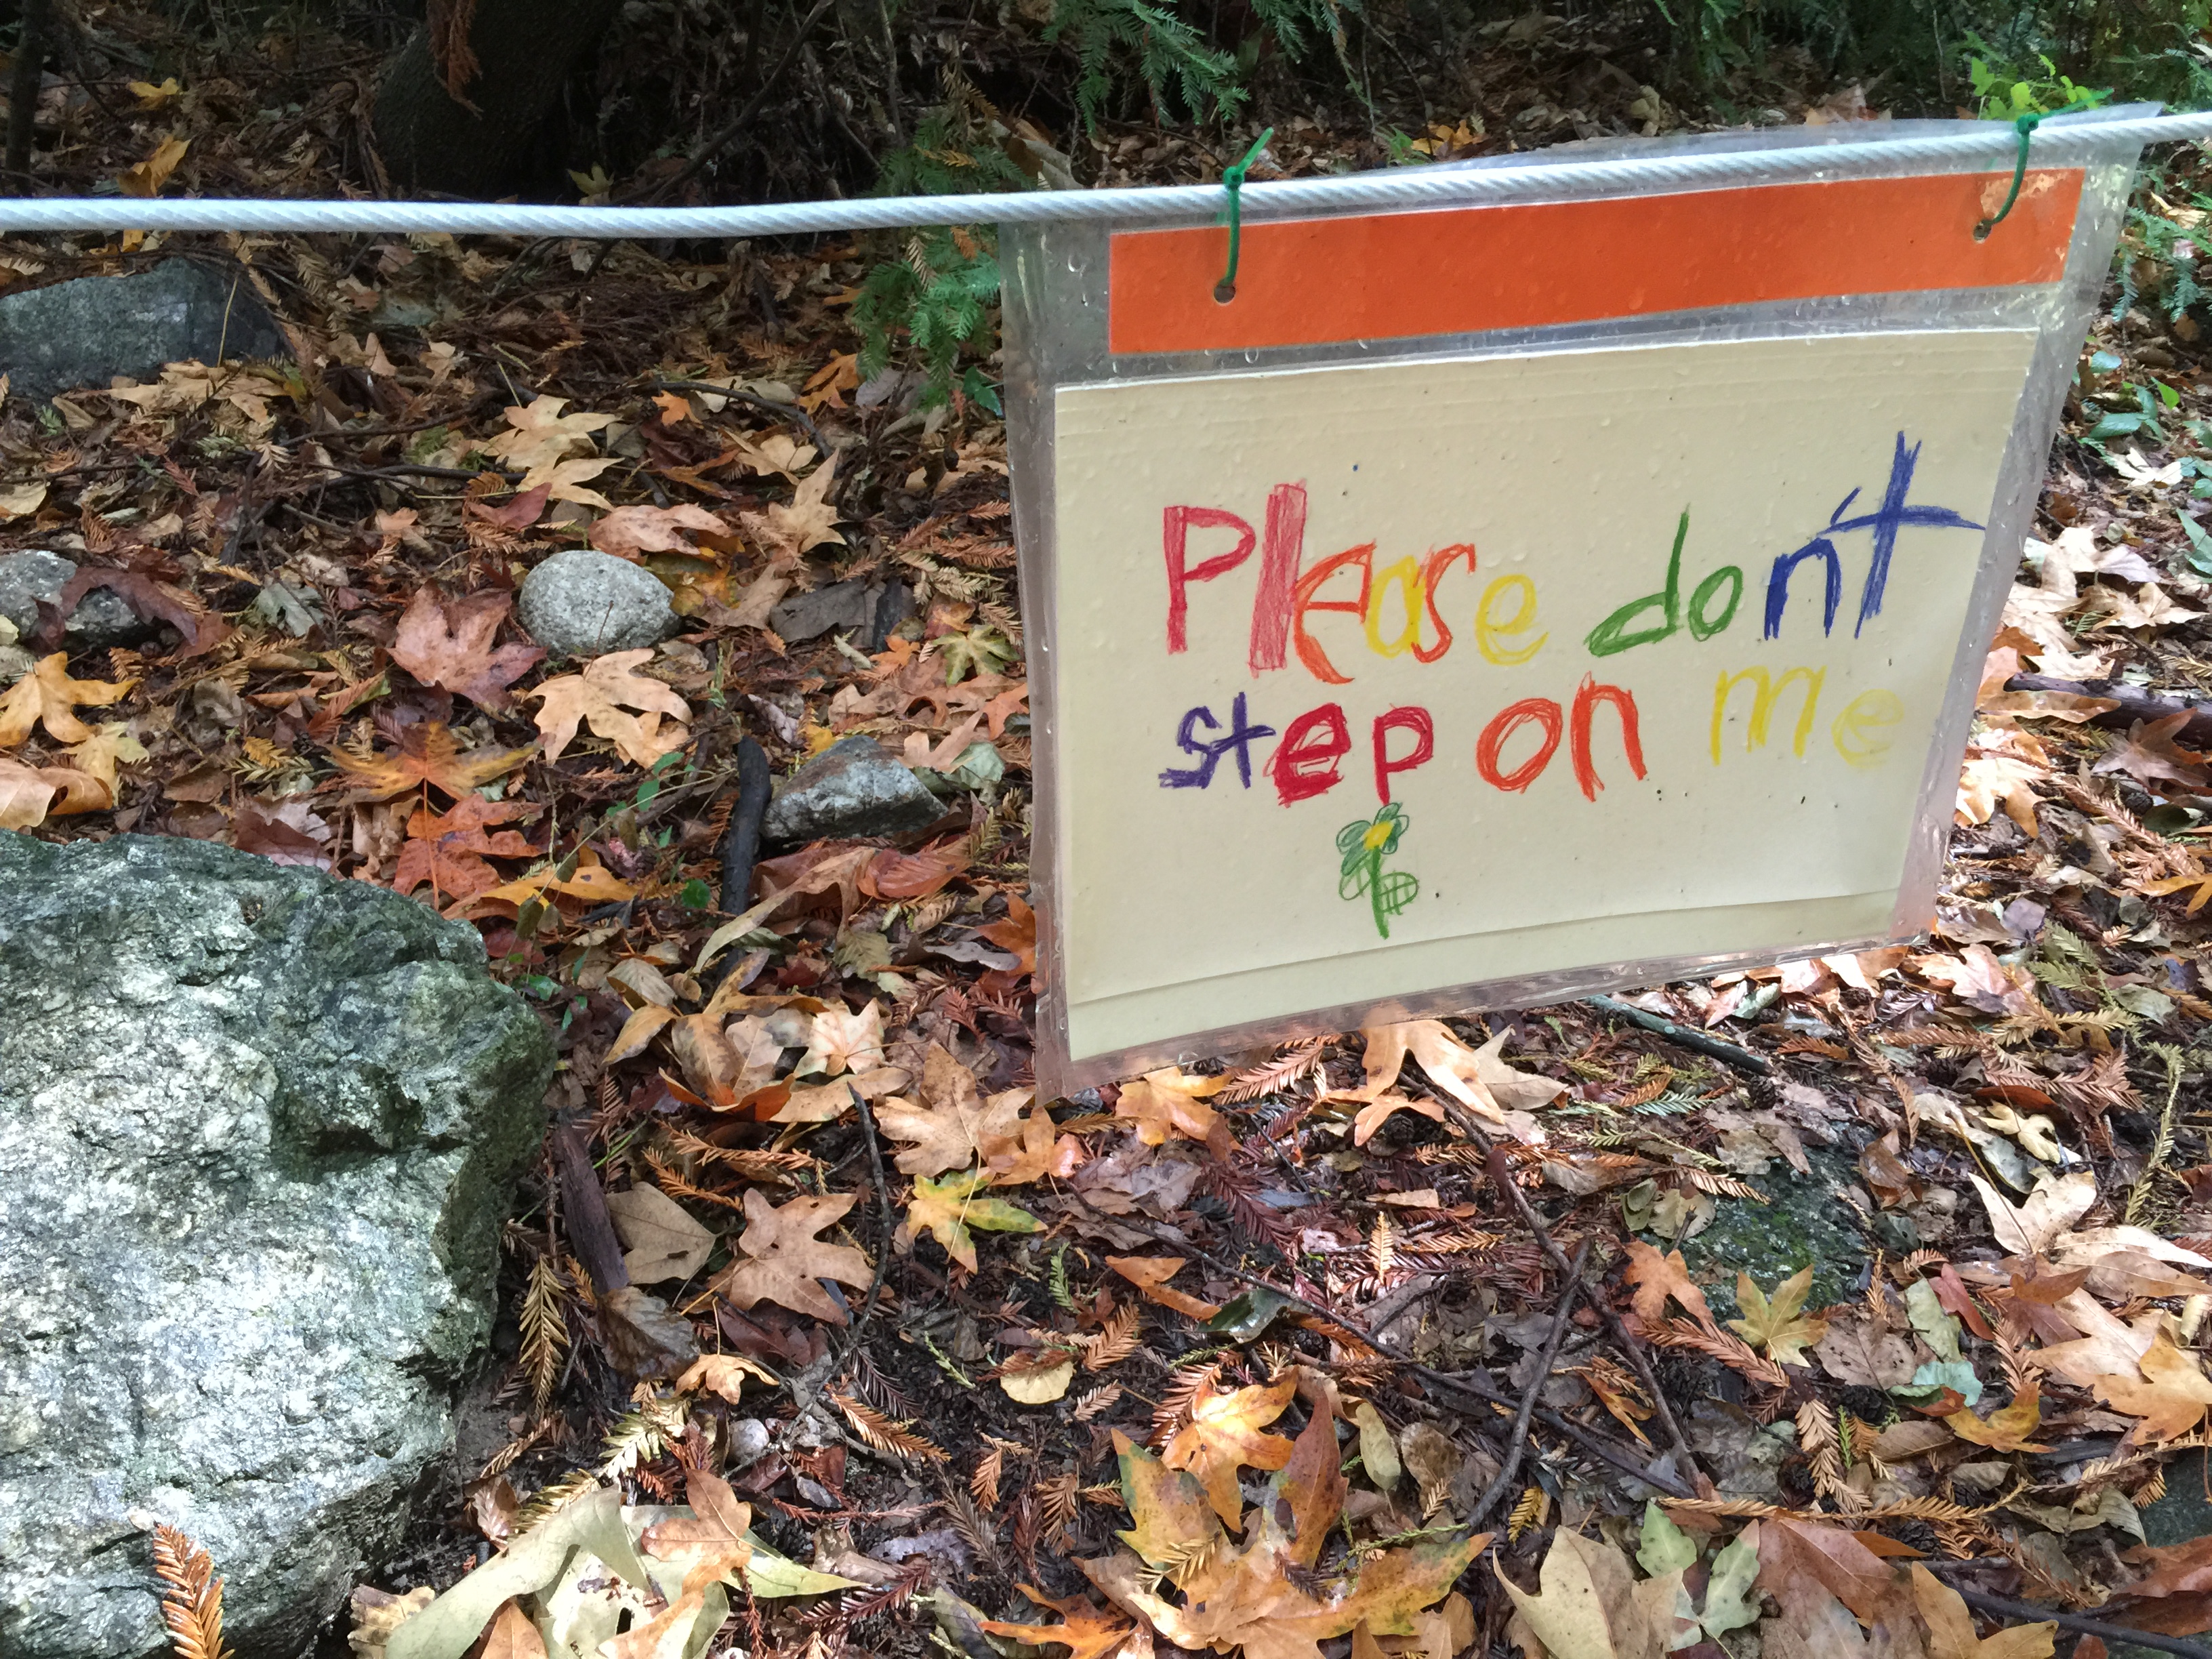 Oh dear. Children and their early attempts at art and graphic design are adorable, sure, but I found these ever-present kiddie-made warning signs too manipulatively  cloying. But I guess in this era of Sean Parker weddings, you have to protect the landscape somehow.